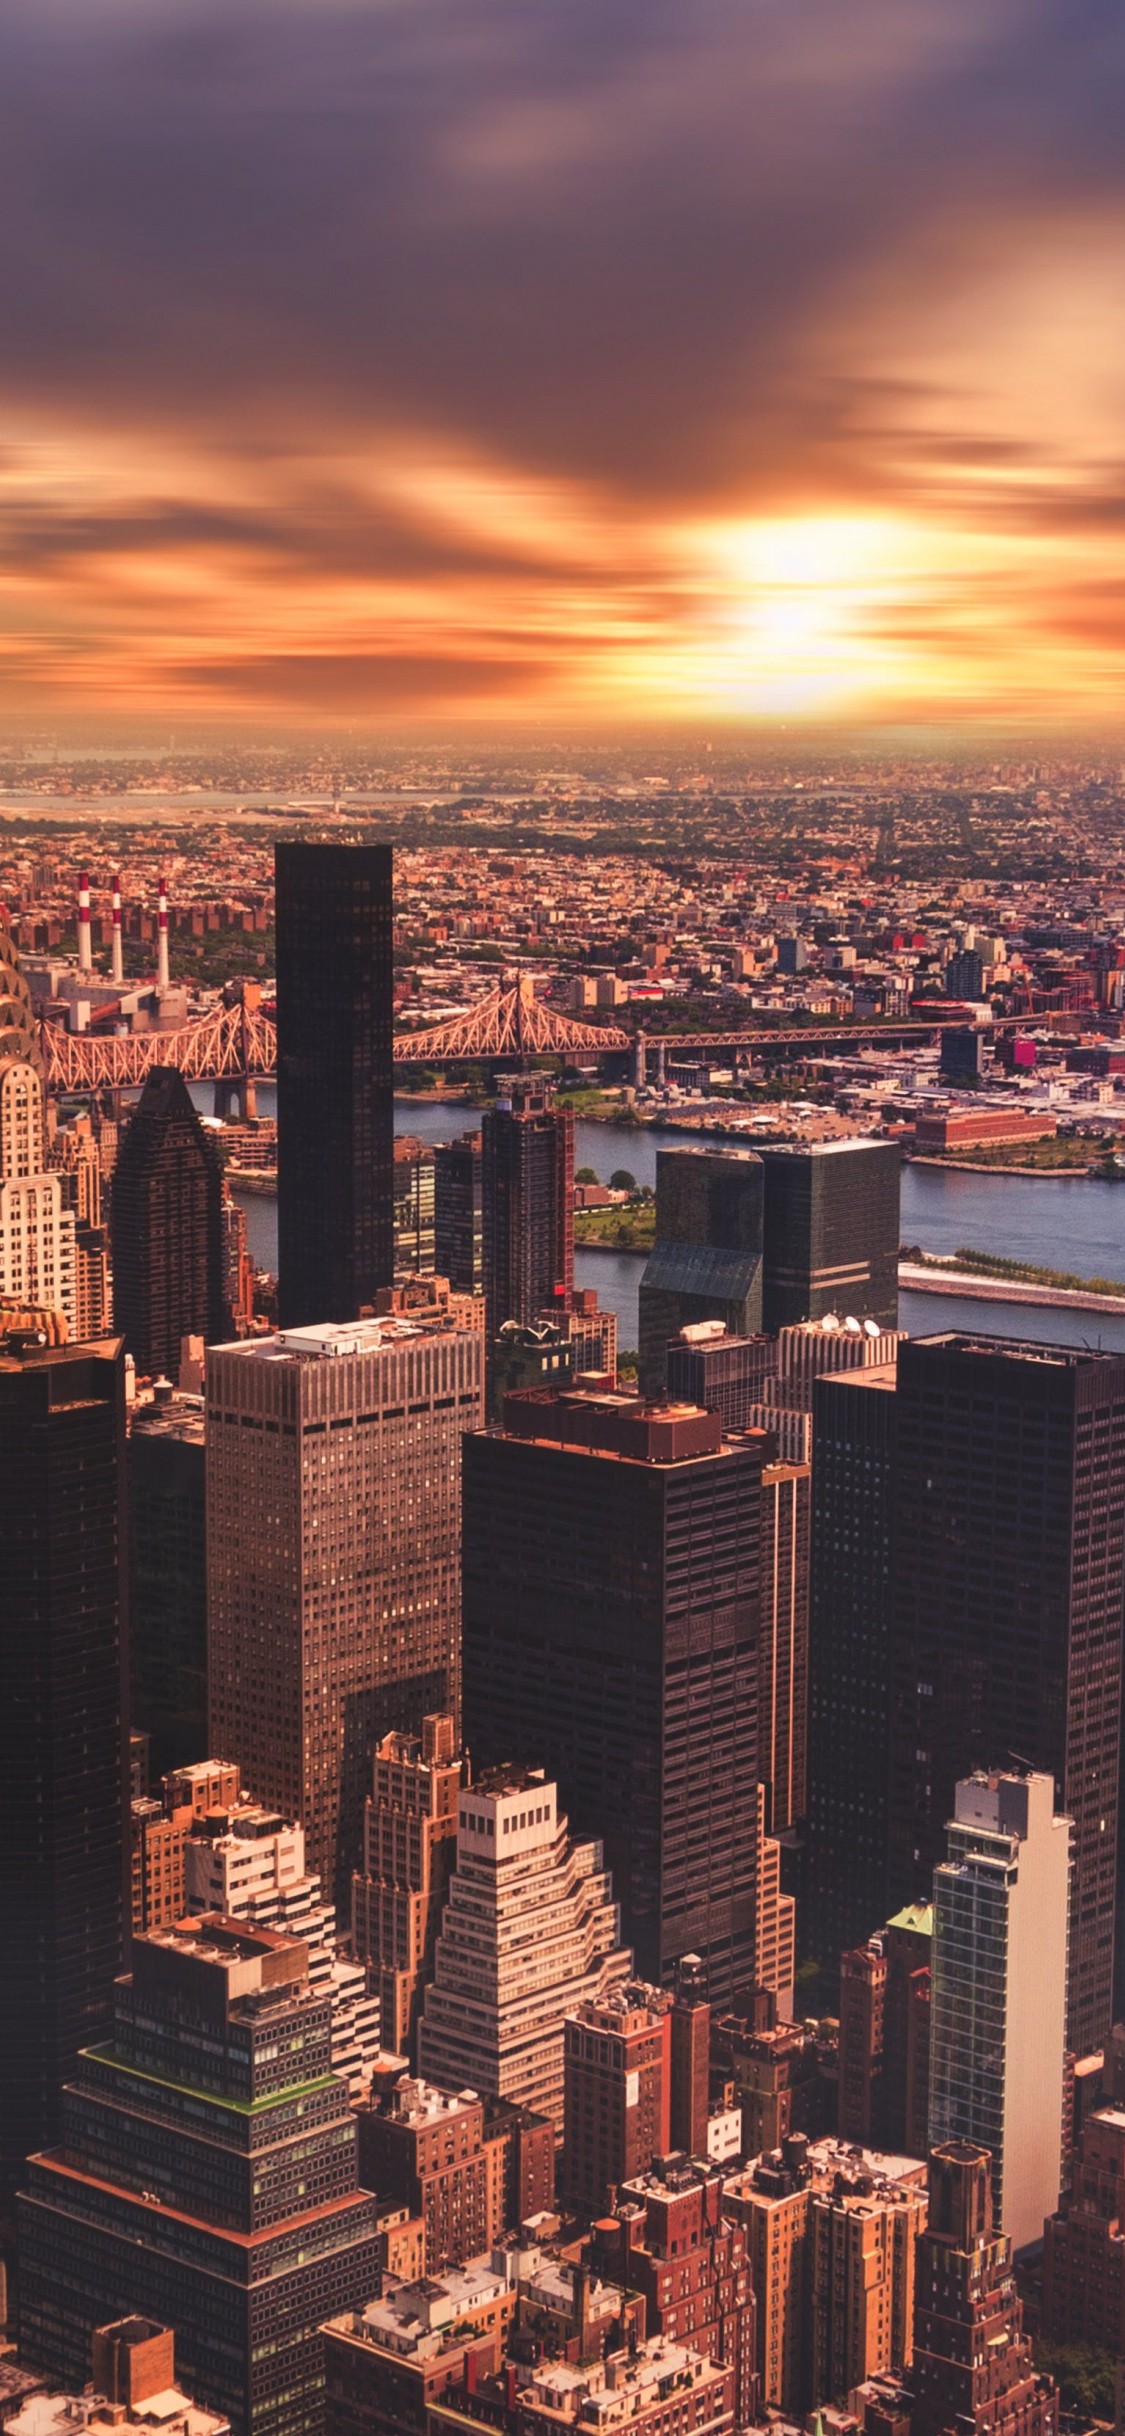 Cityscape, New York, sunset, city, buildings wallpaper, 5103x HD image, picture, 7dff10e8